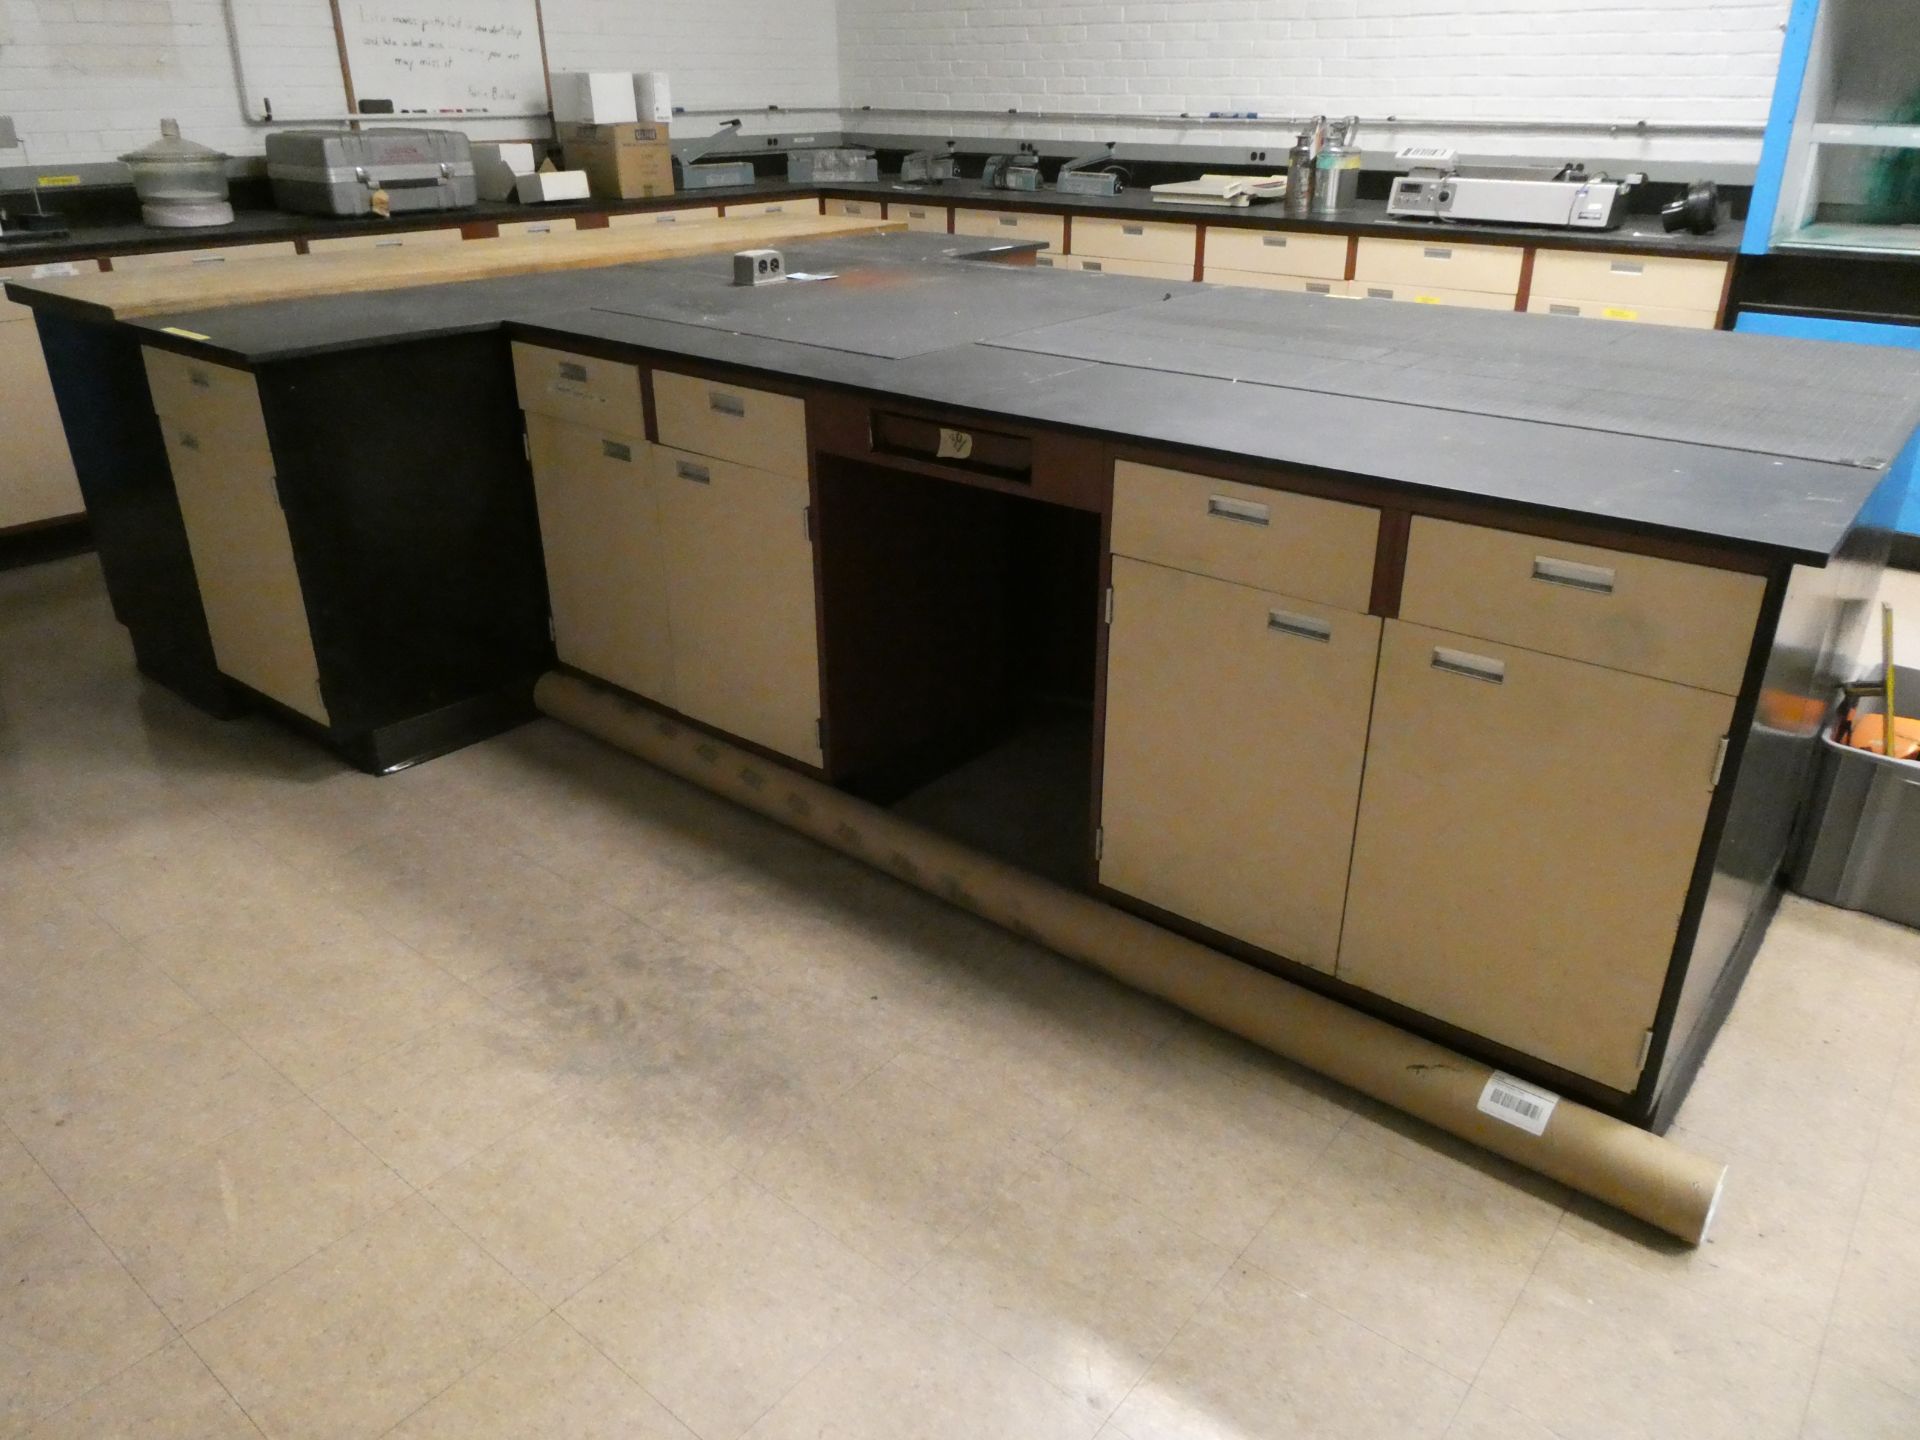 T Shaped Lab Cabinets w/Solid Work Surface - Image 4 of 4